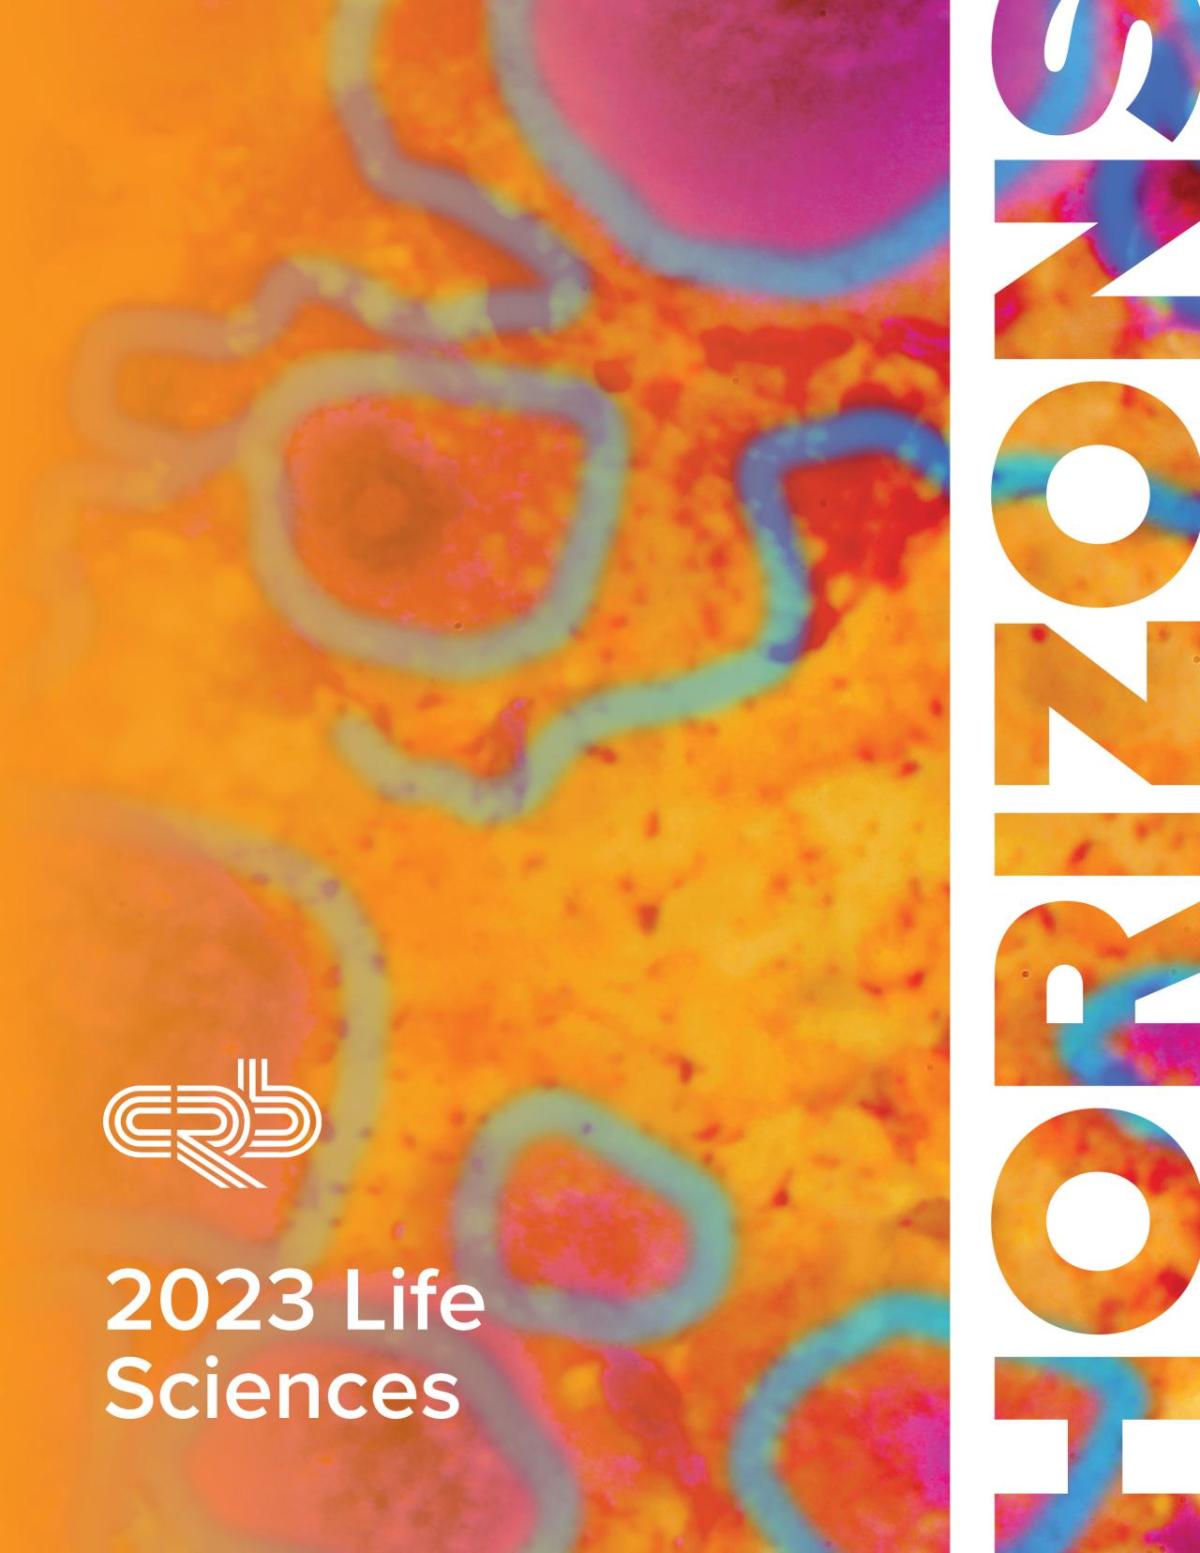 Cover page of the 2023 Life Sciences "Horizons" CRB report.